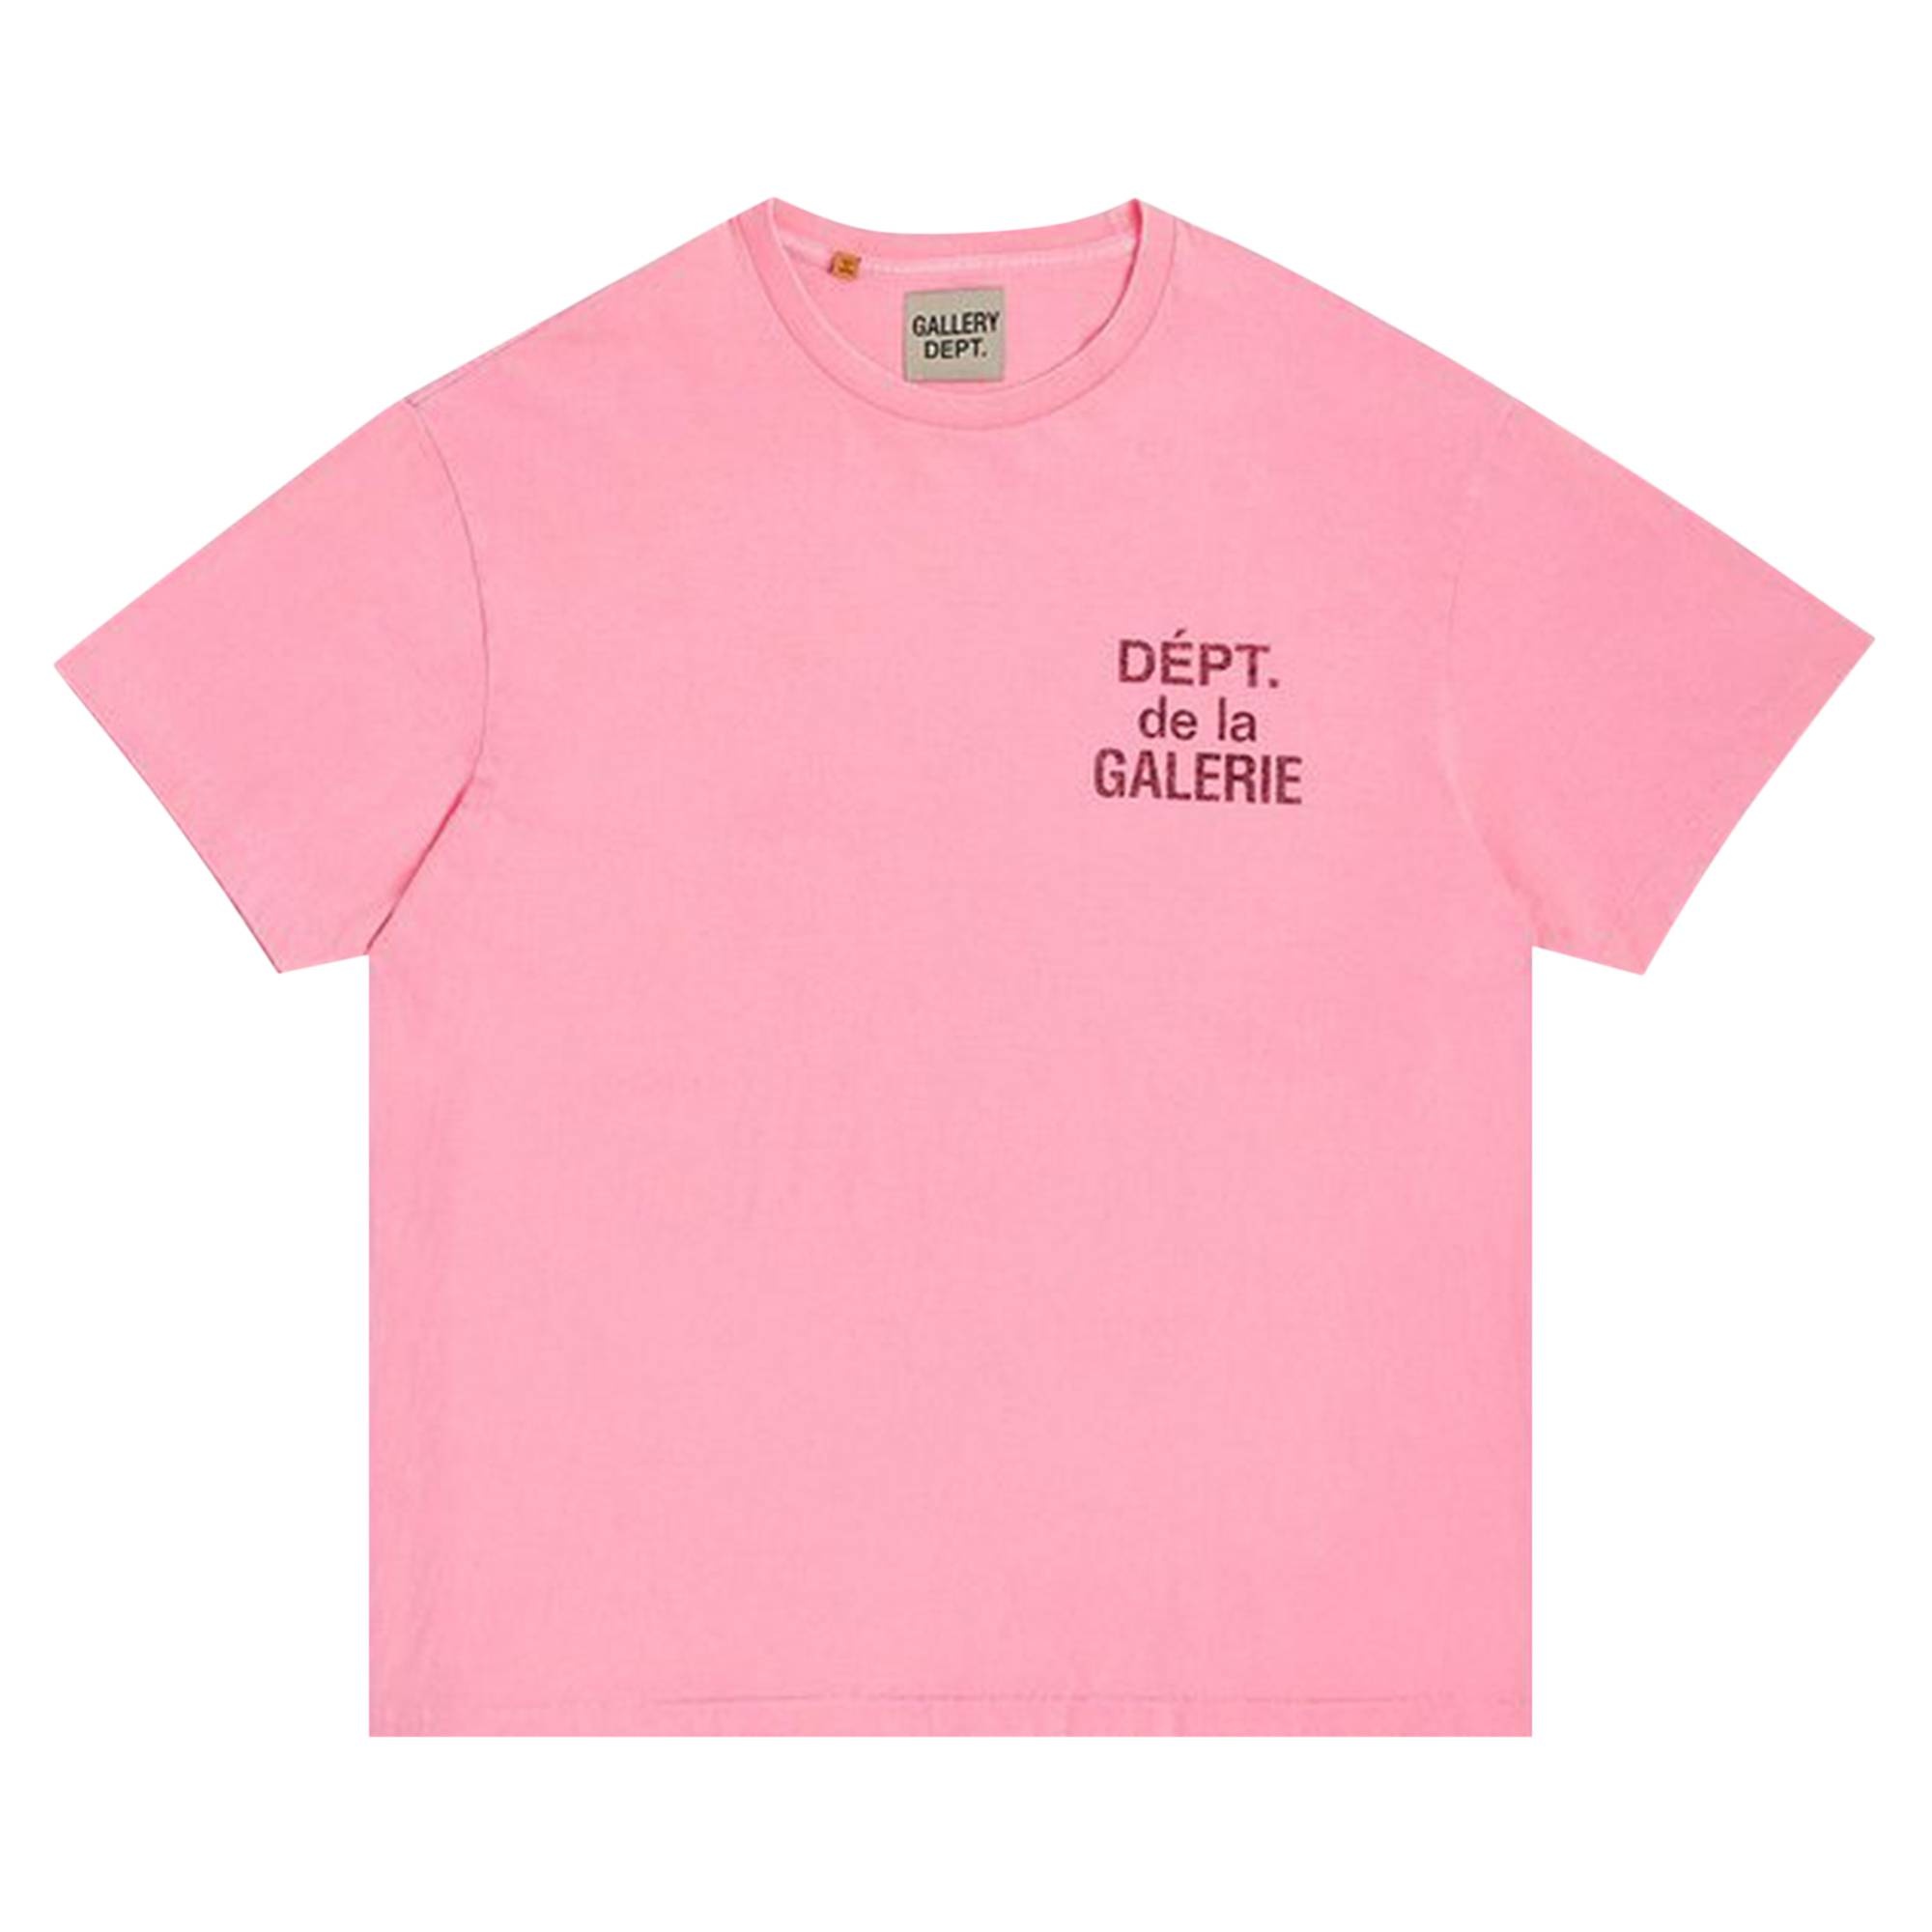 Gallery Dept. French Tee 'Flo Pink' - 1